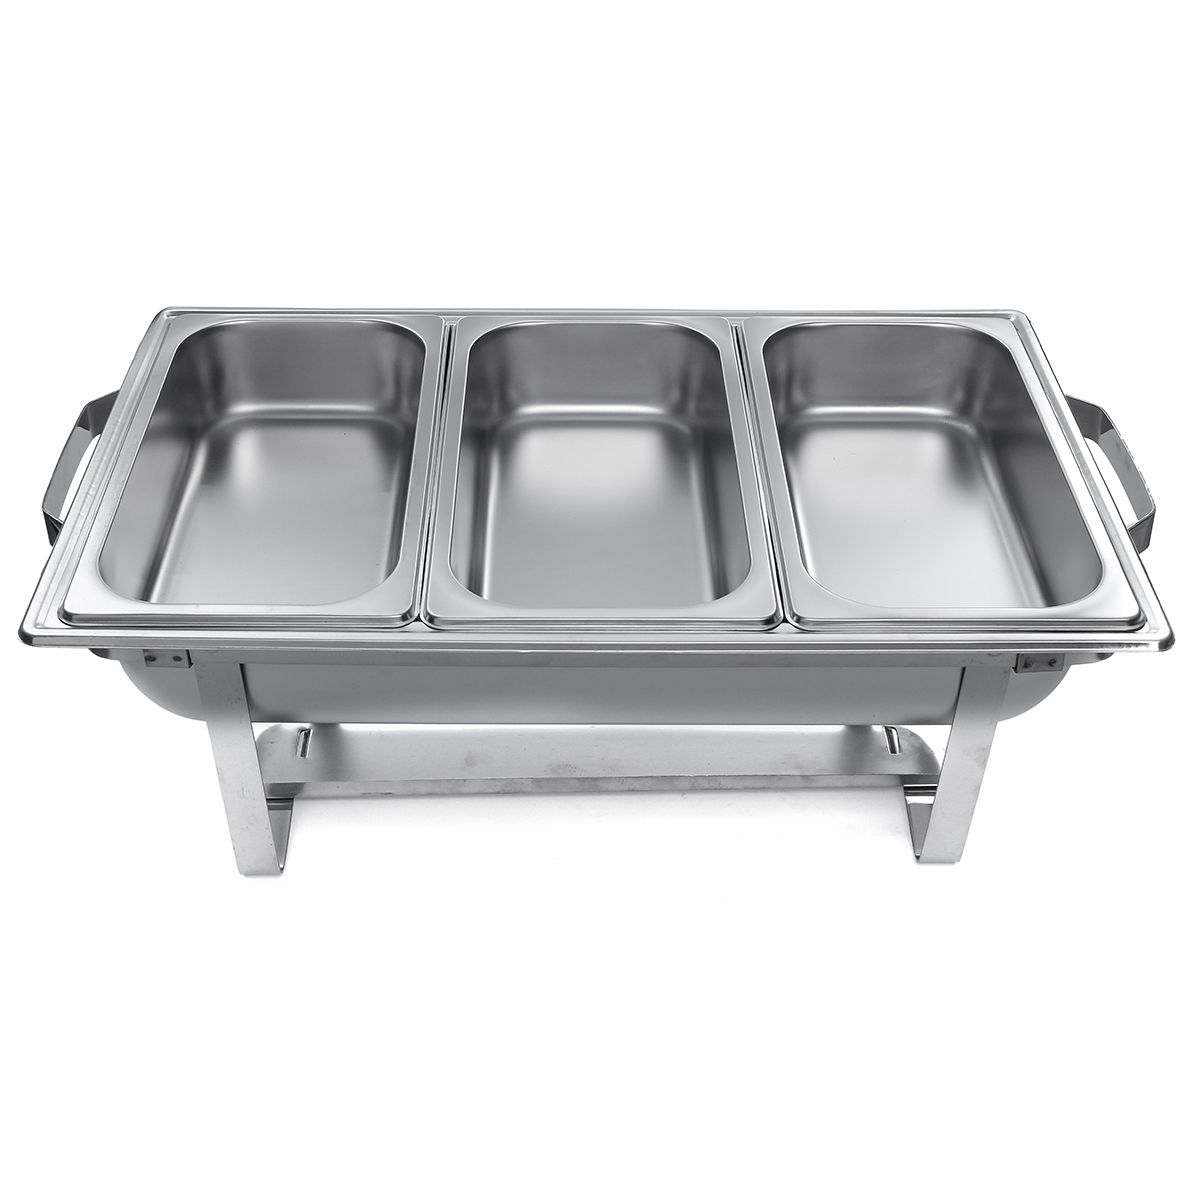 3-Plates-Chafing-Dish-Tray-Buffet-Heating-Stove-Caterer-Warmer-Stainless-Steel-1525766